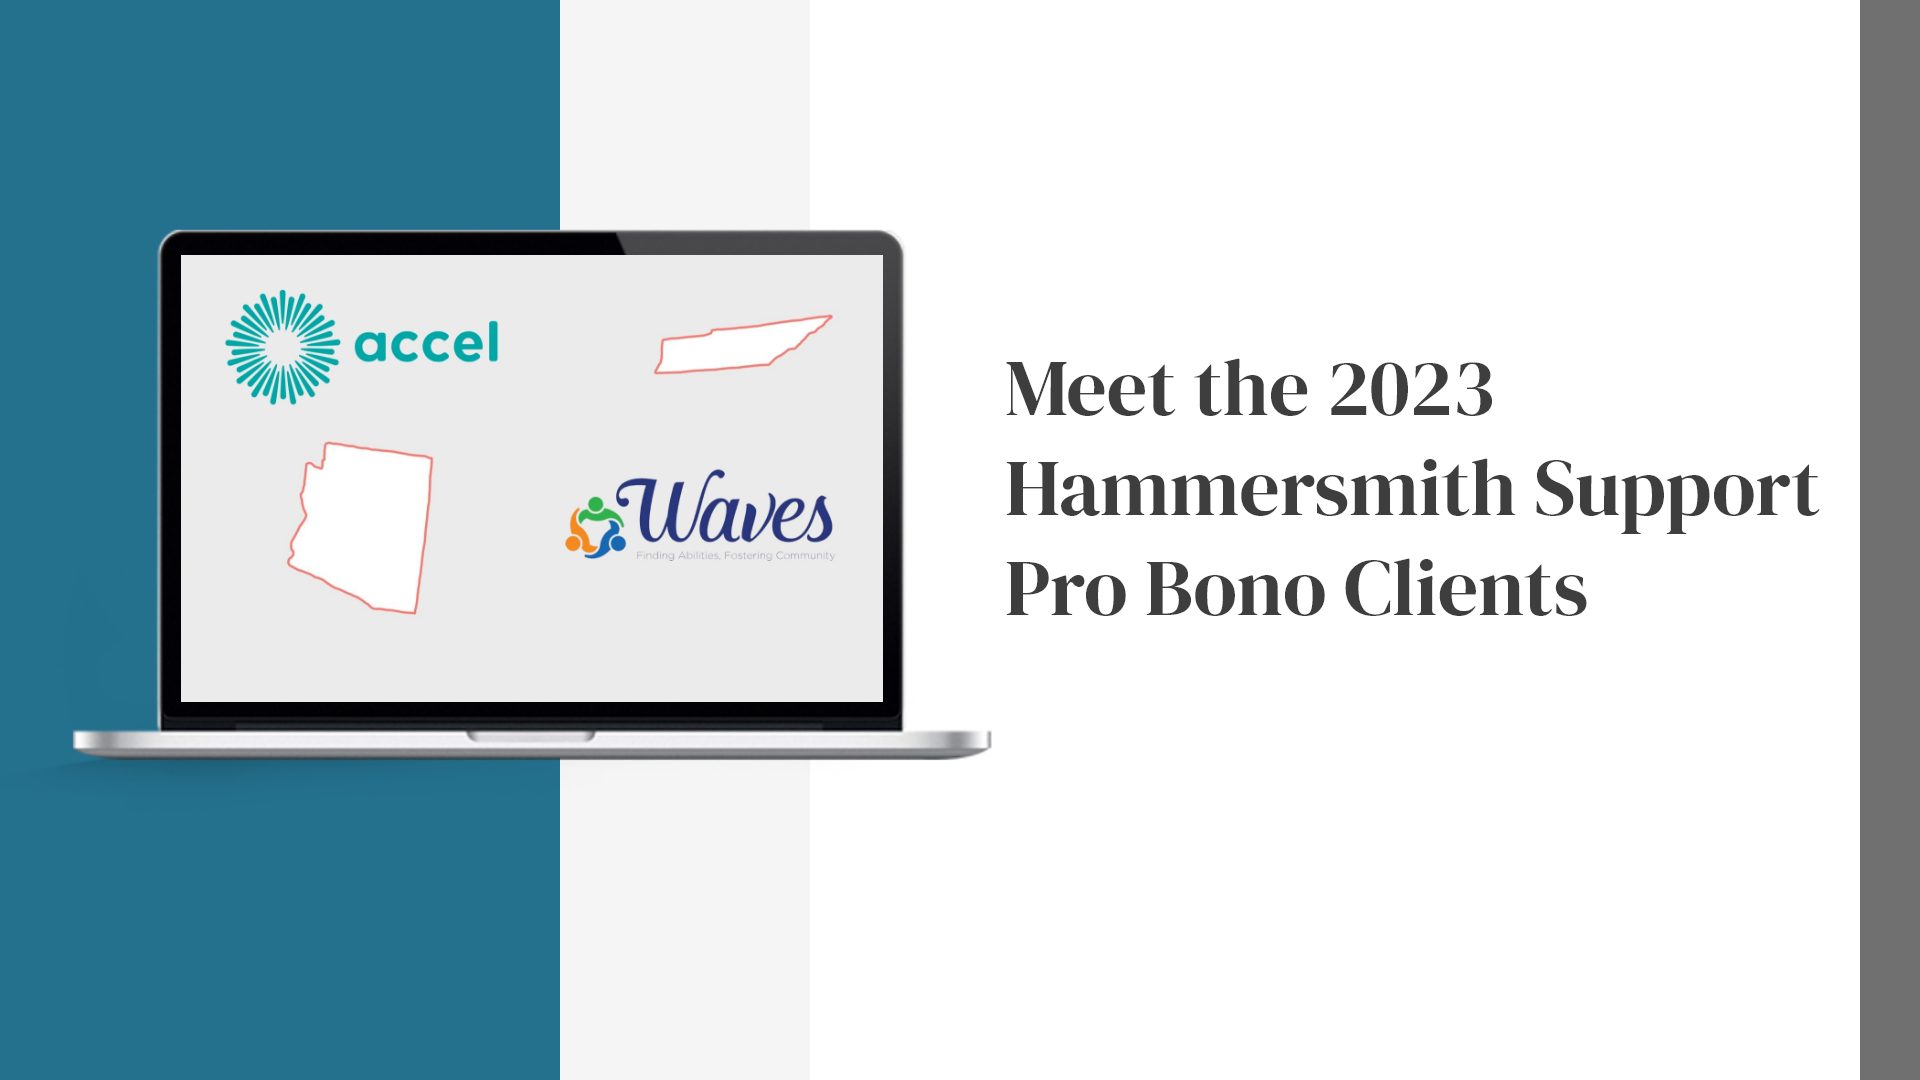 Meet the 2023 Hammersmith Support Pro Bono Clients.